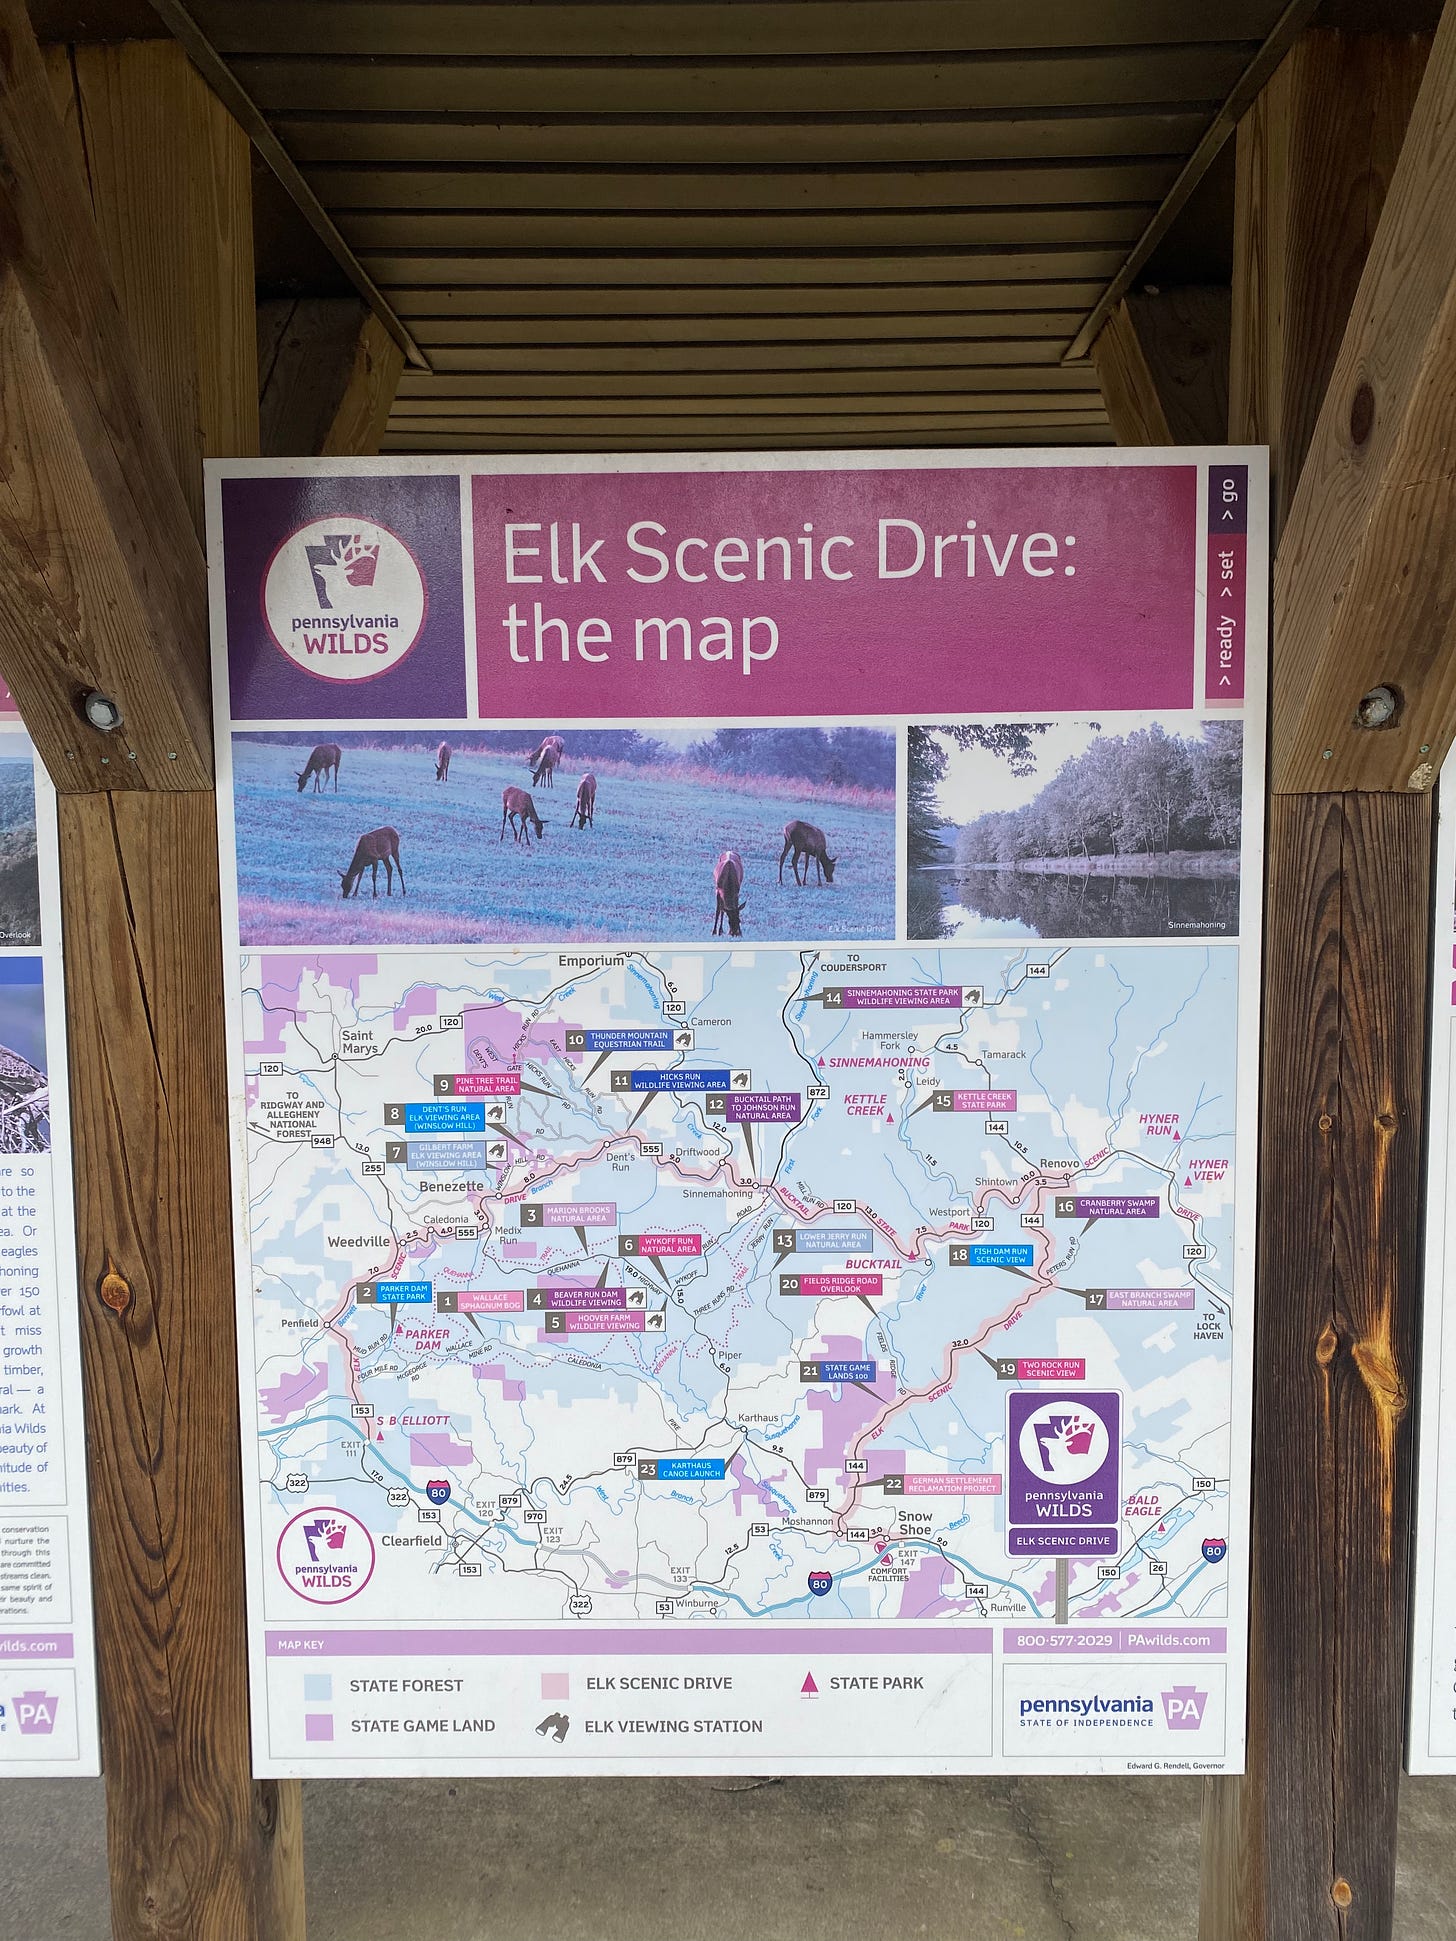 Sign for the Elk Scenic Drive where you can see wild elk in Pennsylvania